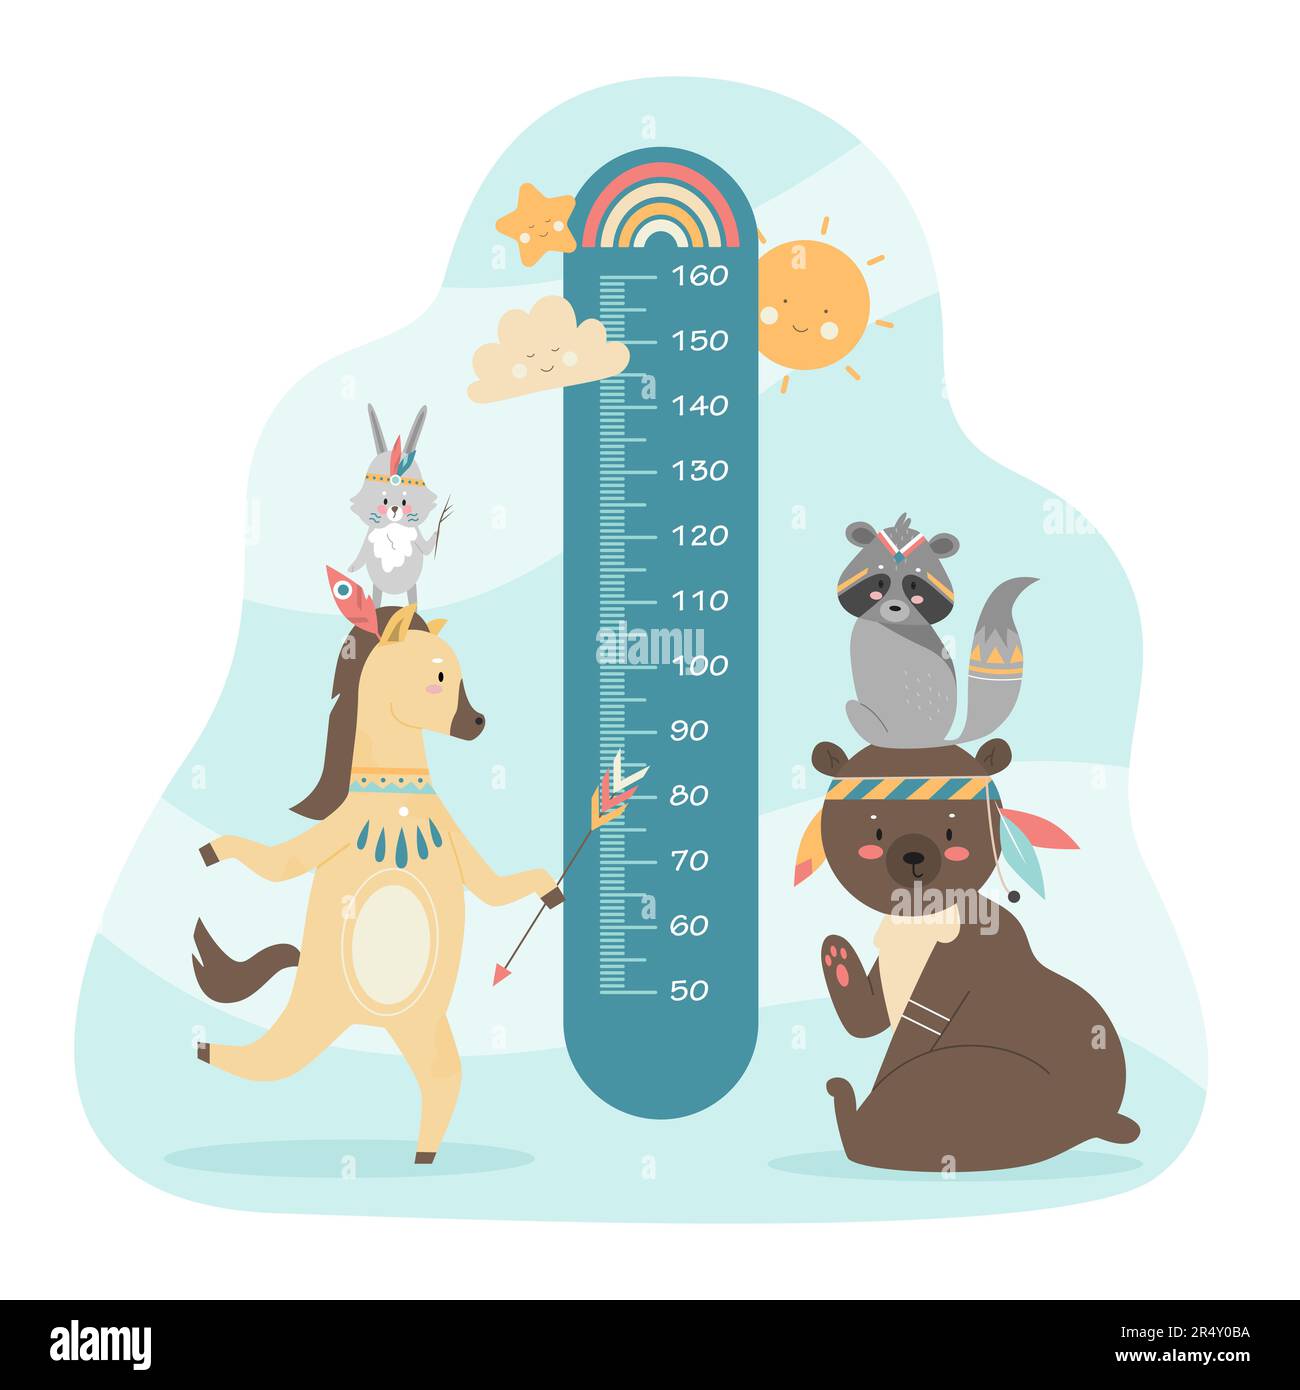 https://c8.alamy.com/comp/2R4Y0BA/kids-height-chart-with-cute-boho-animals-vector-illustration-cartoon-ruler-with-millimeter-scale-to-measure-growth-of-child-with-funny-tribal-raccoon-and-bear-bohemian-bunny-and-pony-with-arrow-2R4Y0BA.jpg